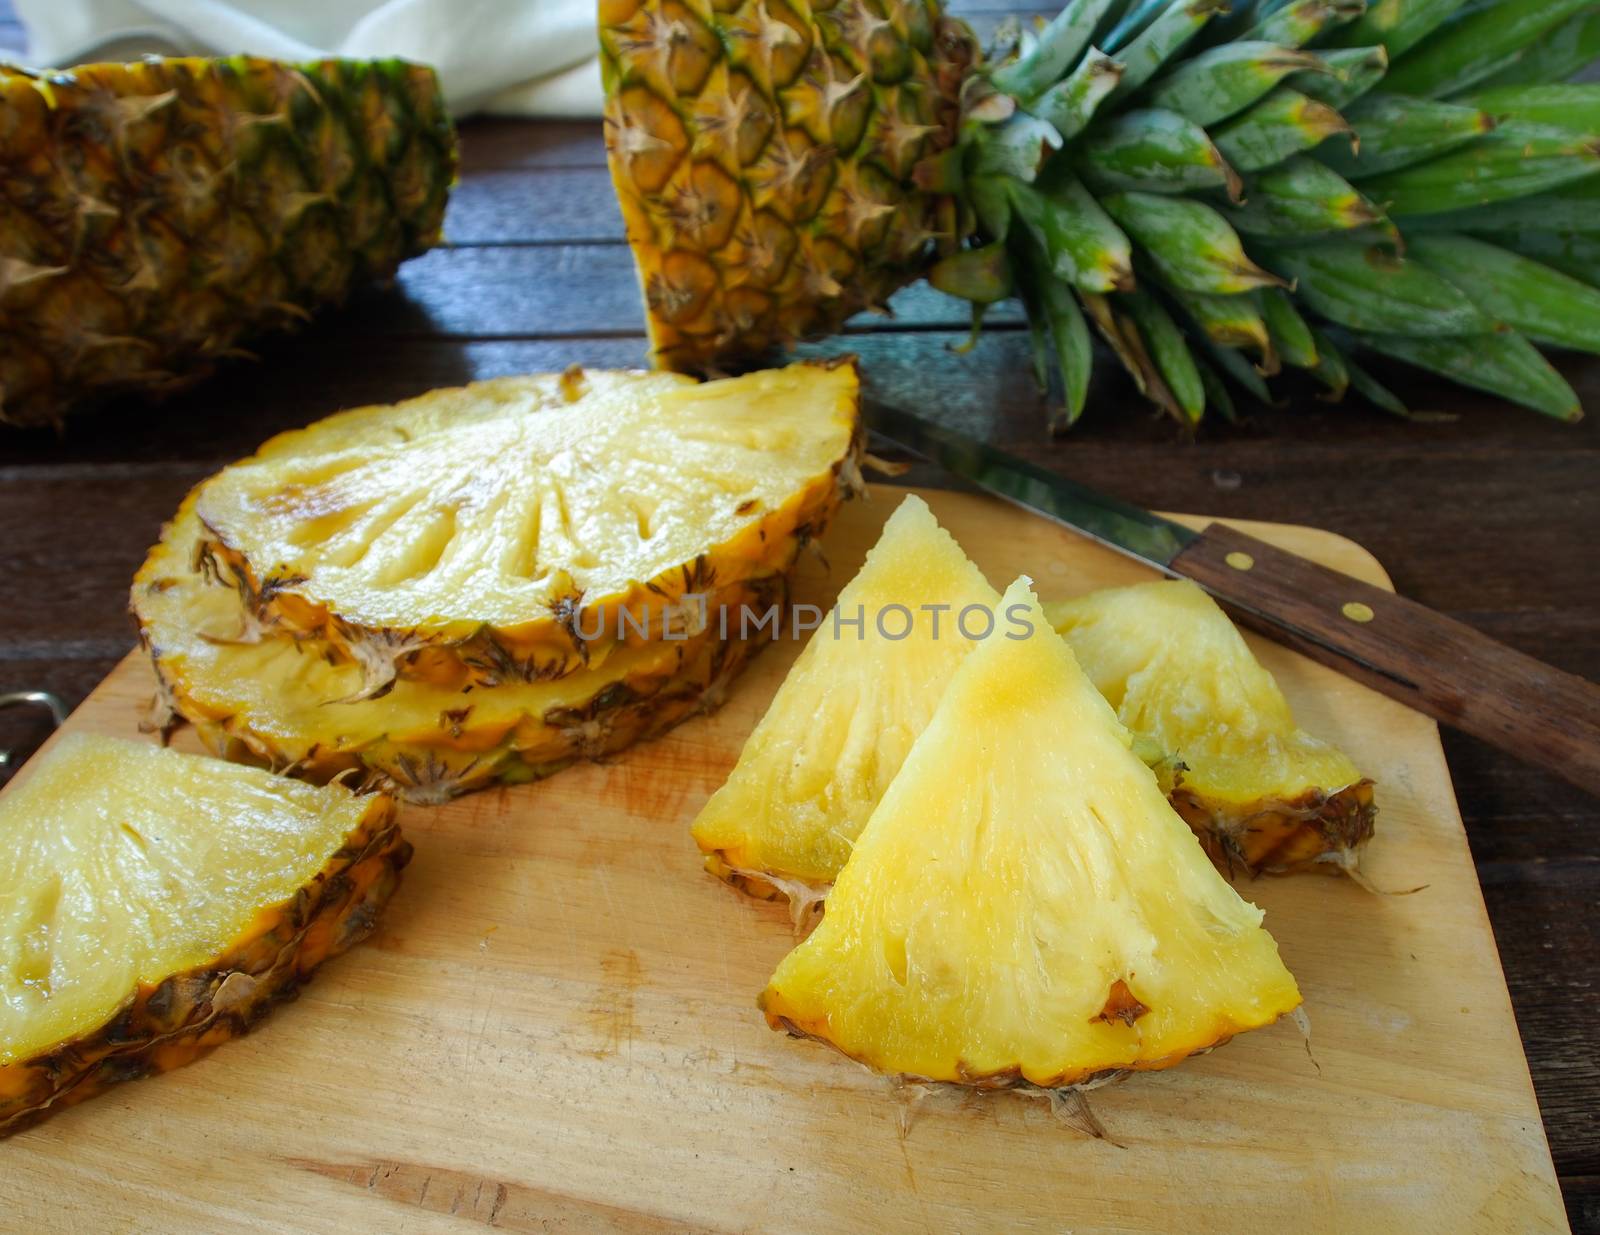 Pineapple slices on a wooden cutting board